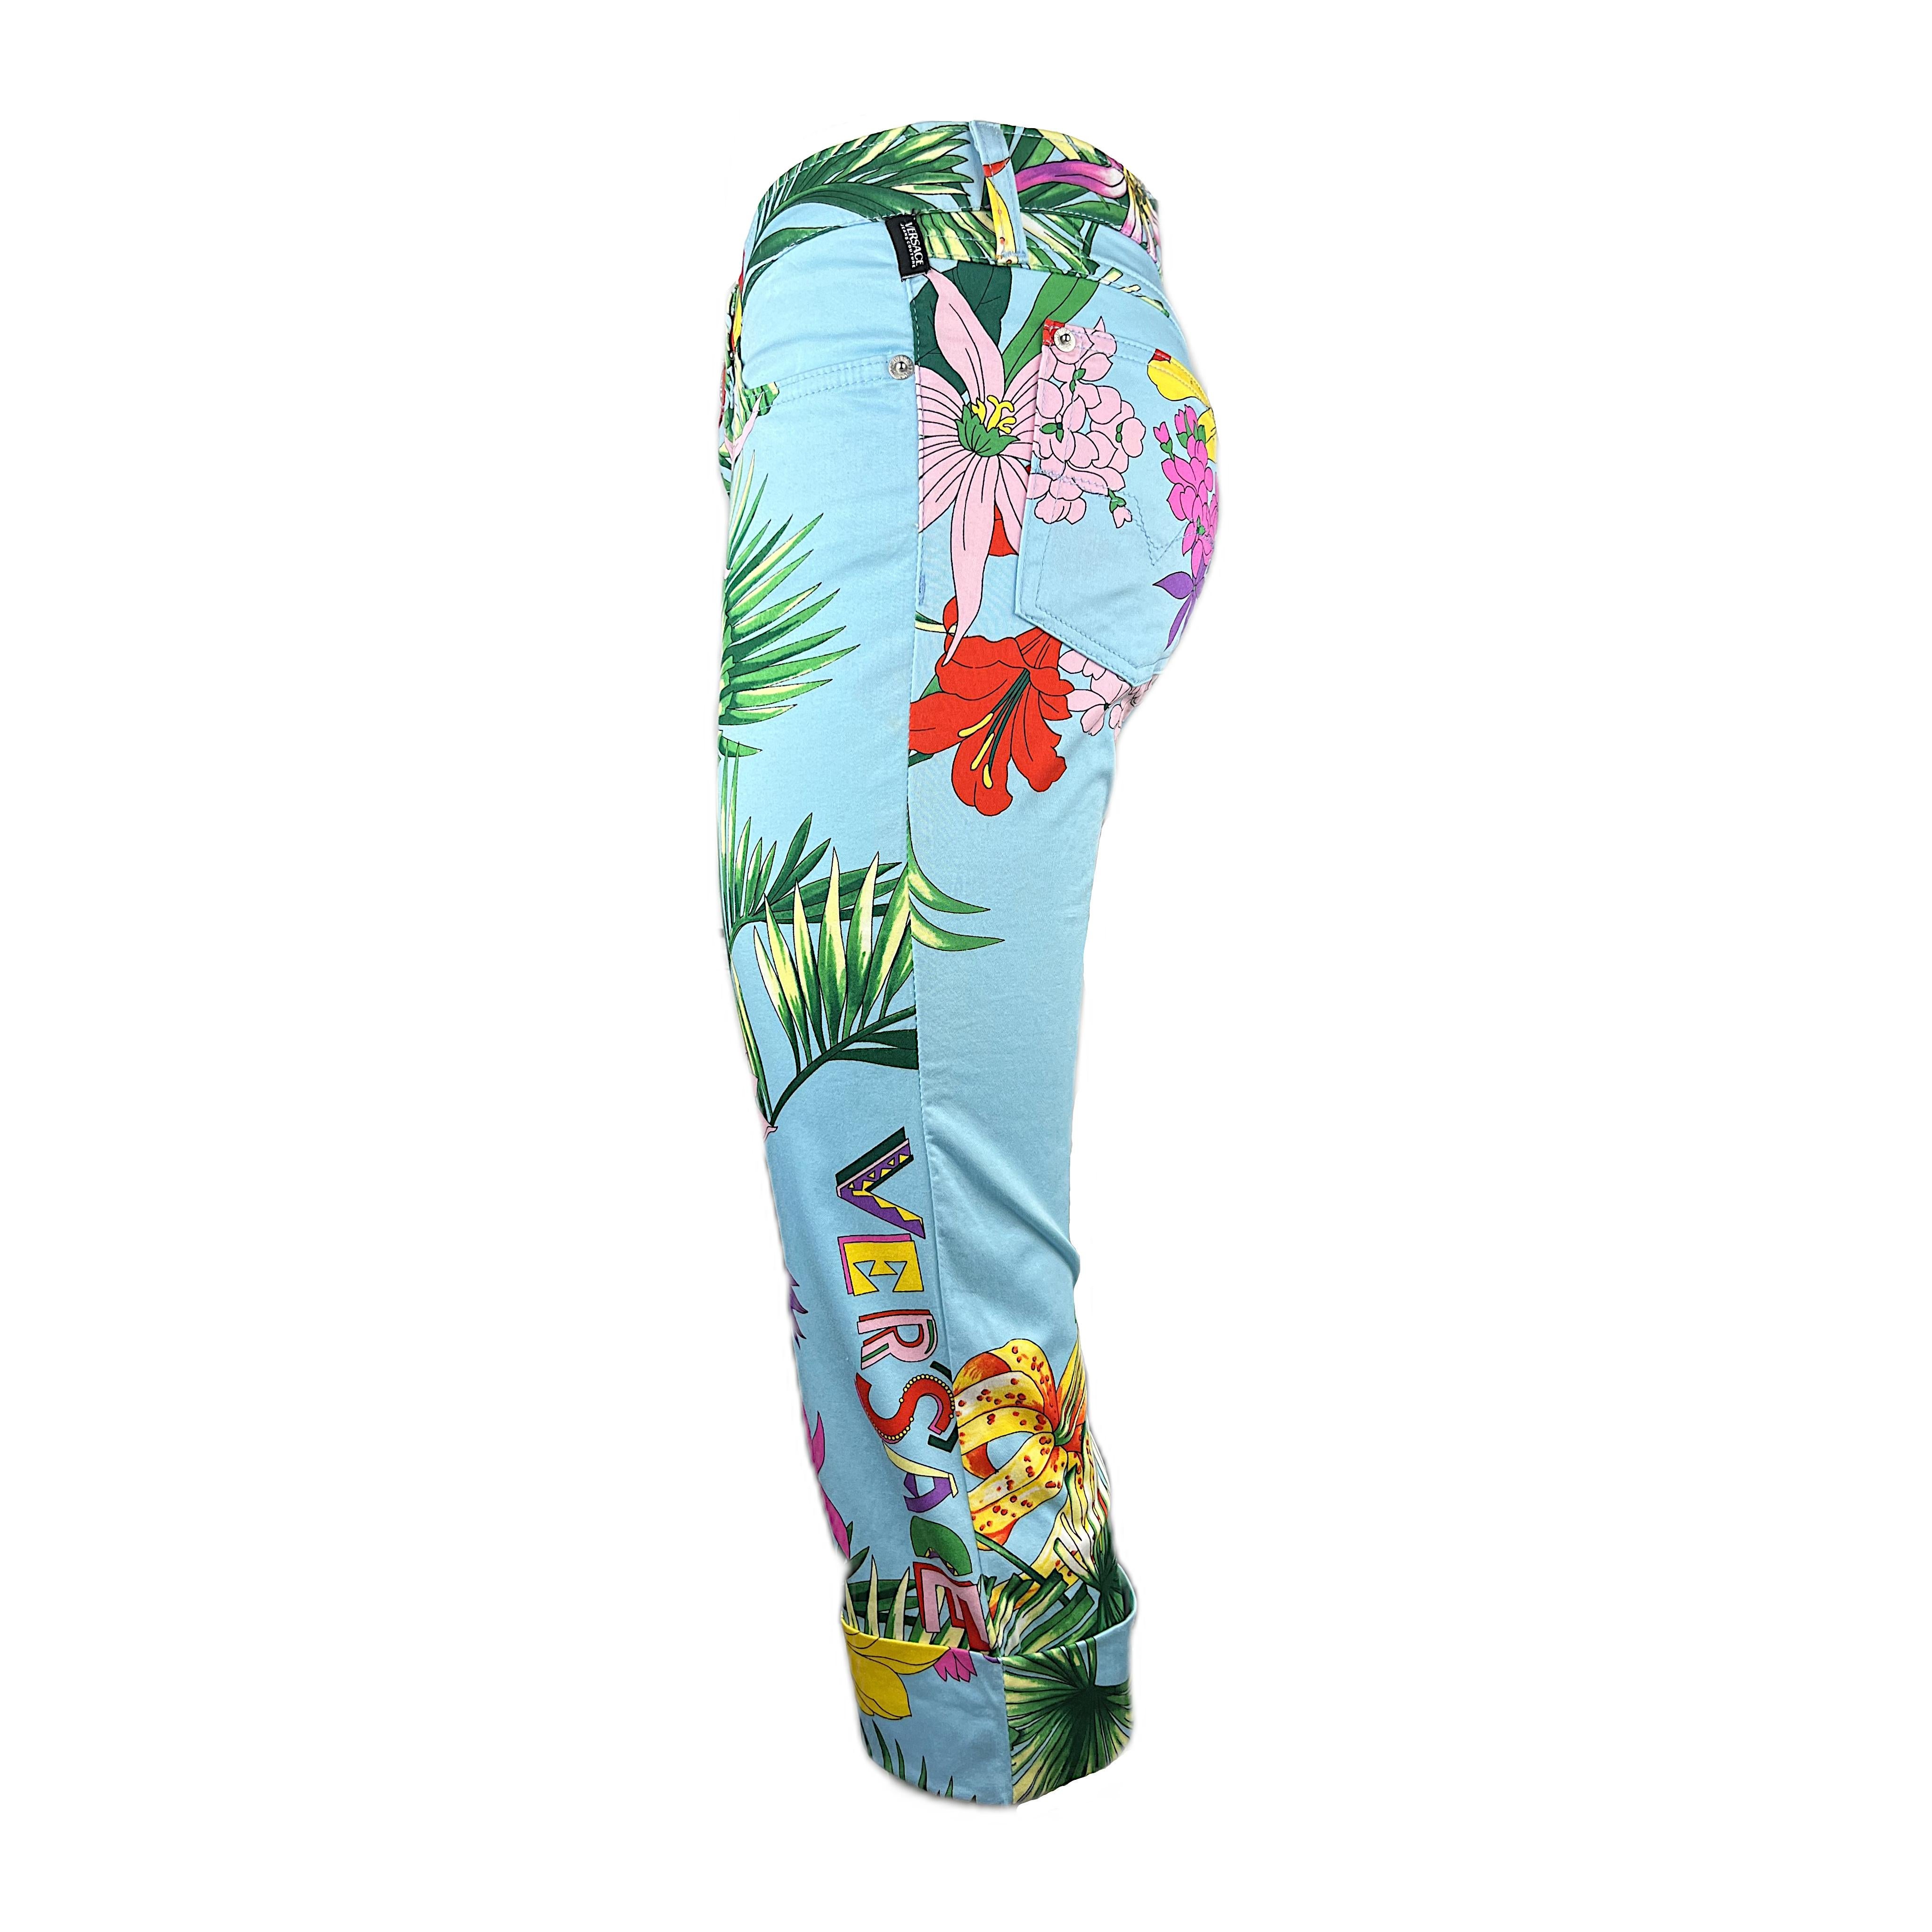 Wonderful capri pants labeled by Versace's casual brand, Versace Jeans Couture, featuring a tropical floral print on a cobalt background. These low-waist pants have V-shaped loops in the backside, 2 front pockets and 2 rear jeans-style pockets. All